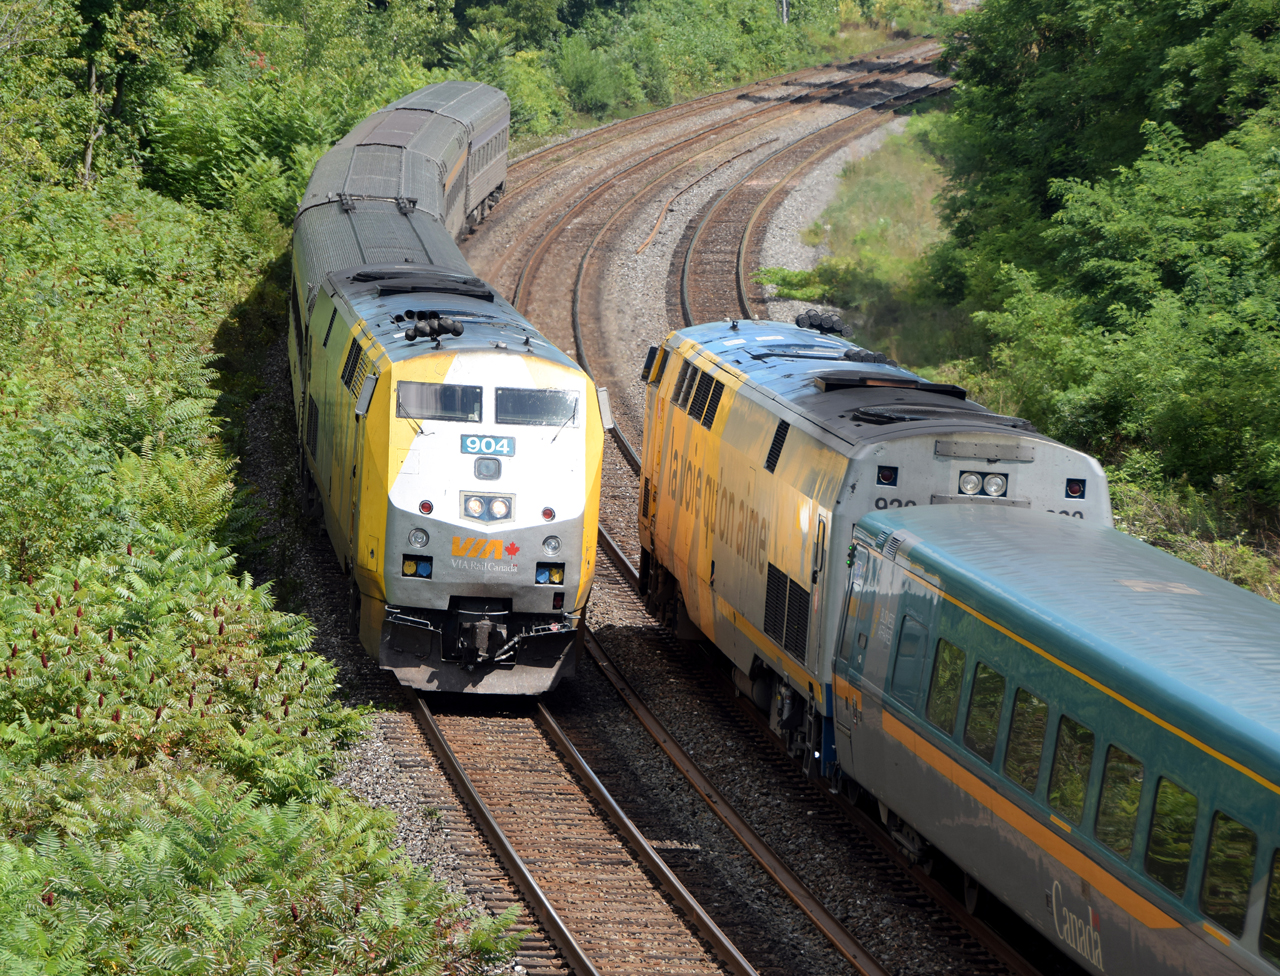 72 and 73 meet at Bayview with VIA 920 and VIA 904 leading their respective trains